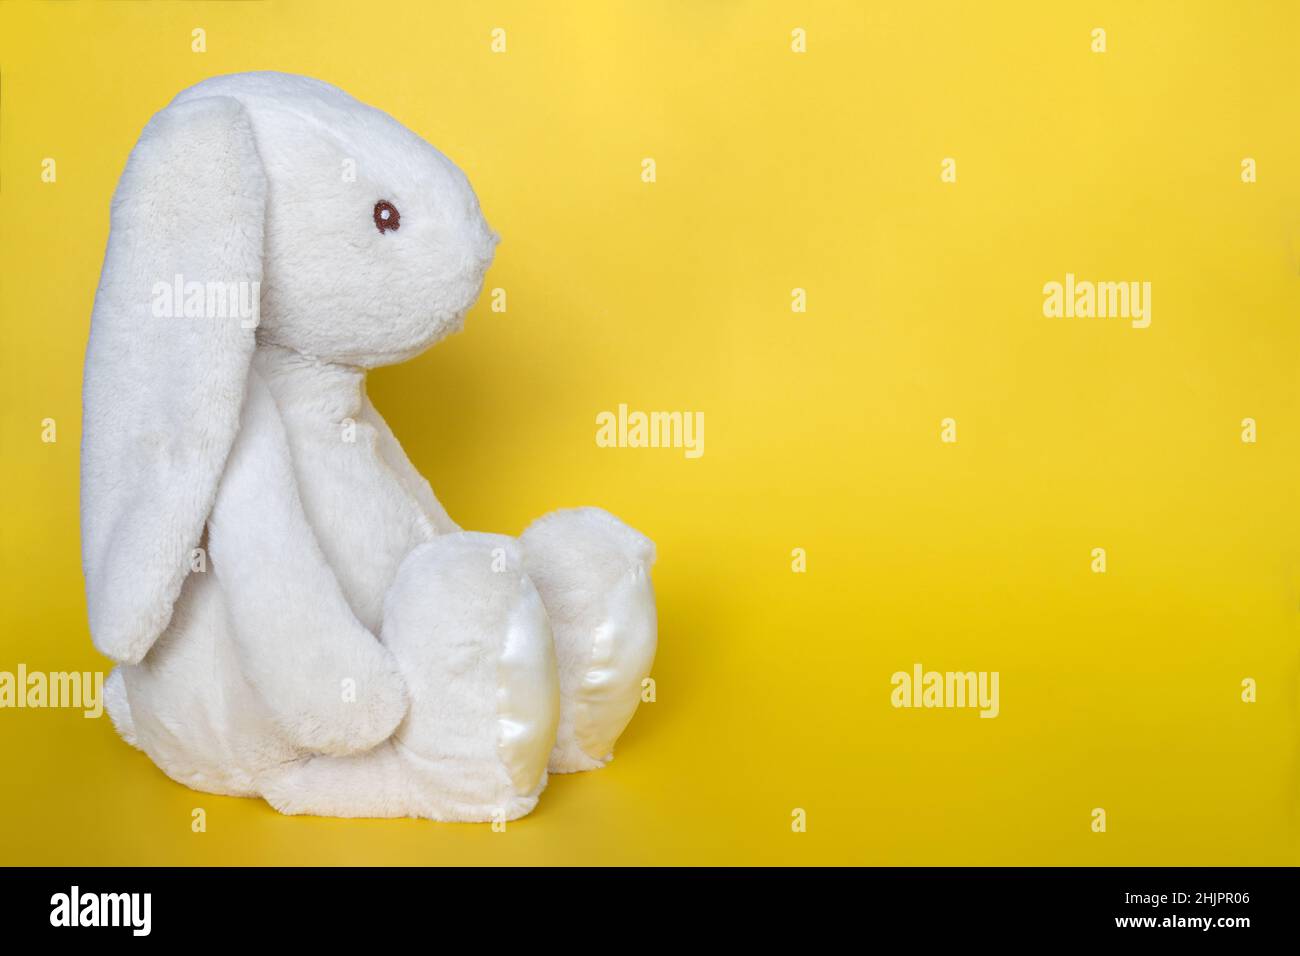 Stuffed bunny on yellow background. Easter concept. Beautisul white toy bunny sitting on colored background with copy space for text Stock Photo